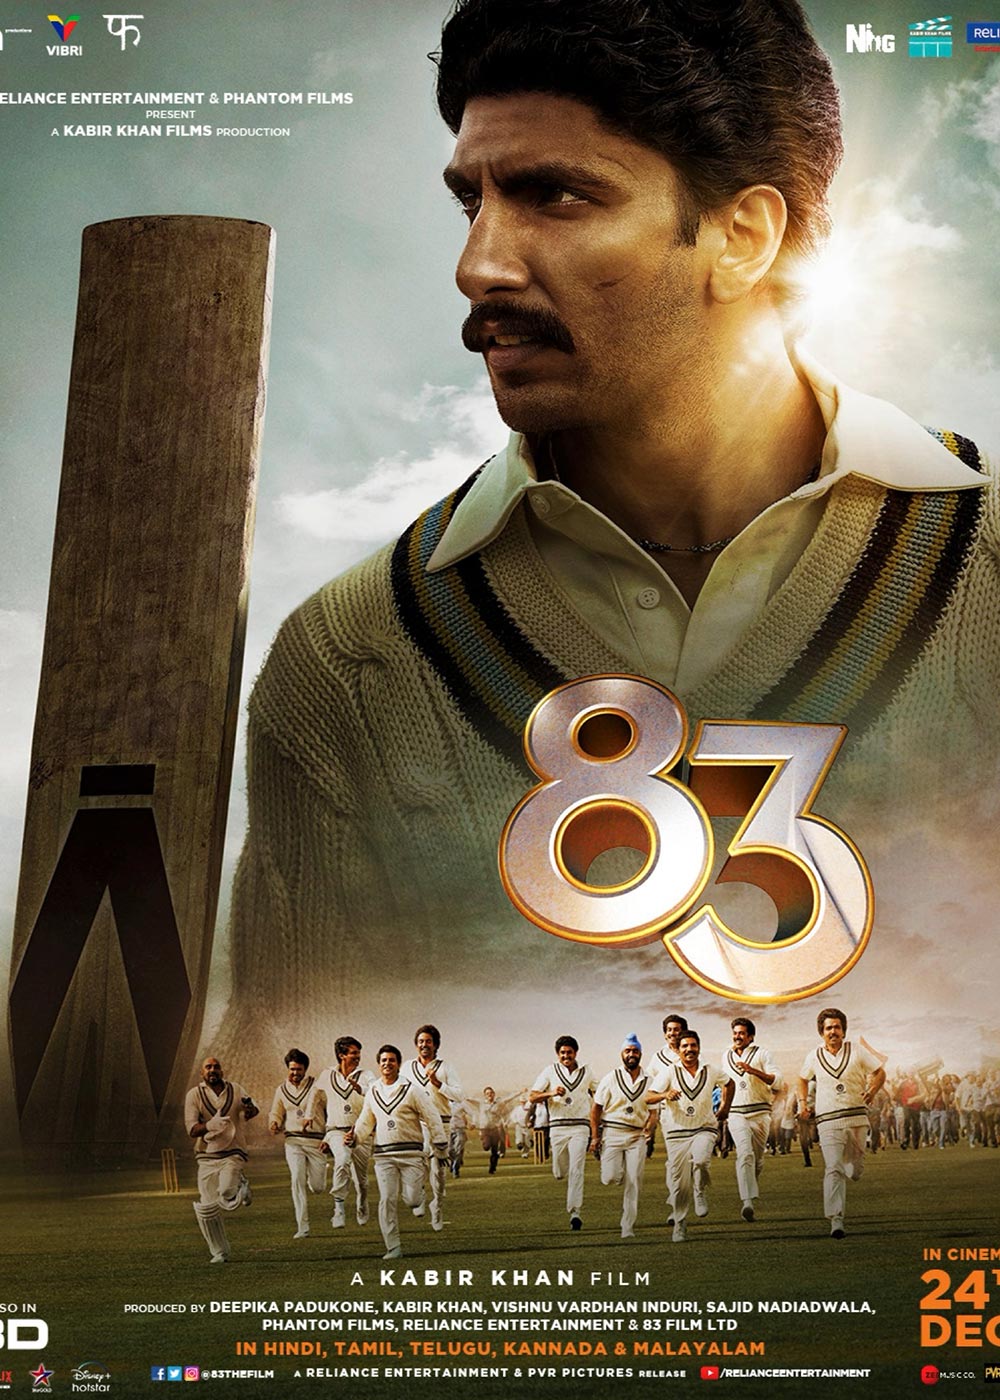 83 full movie review